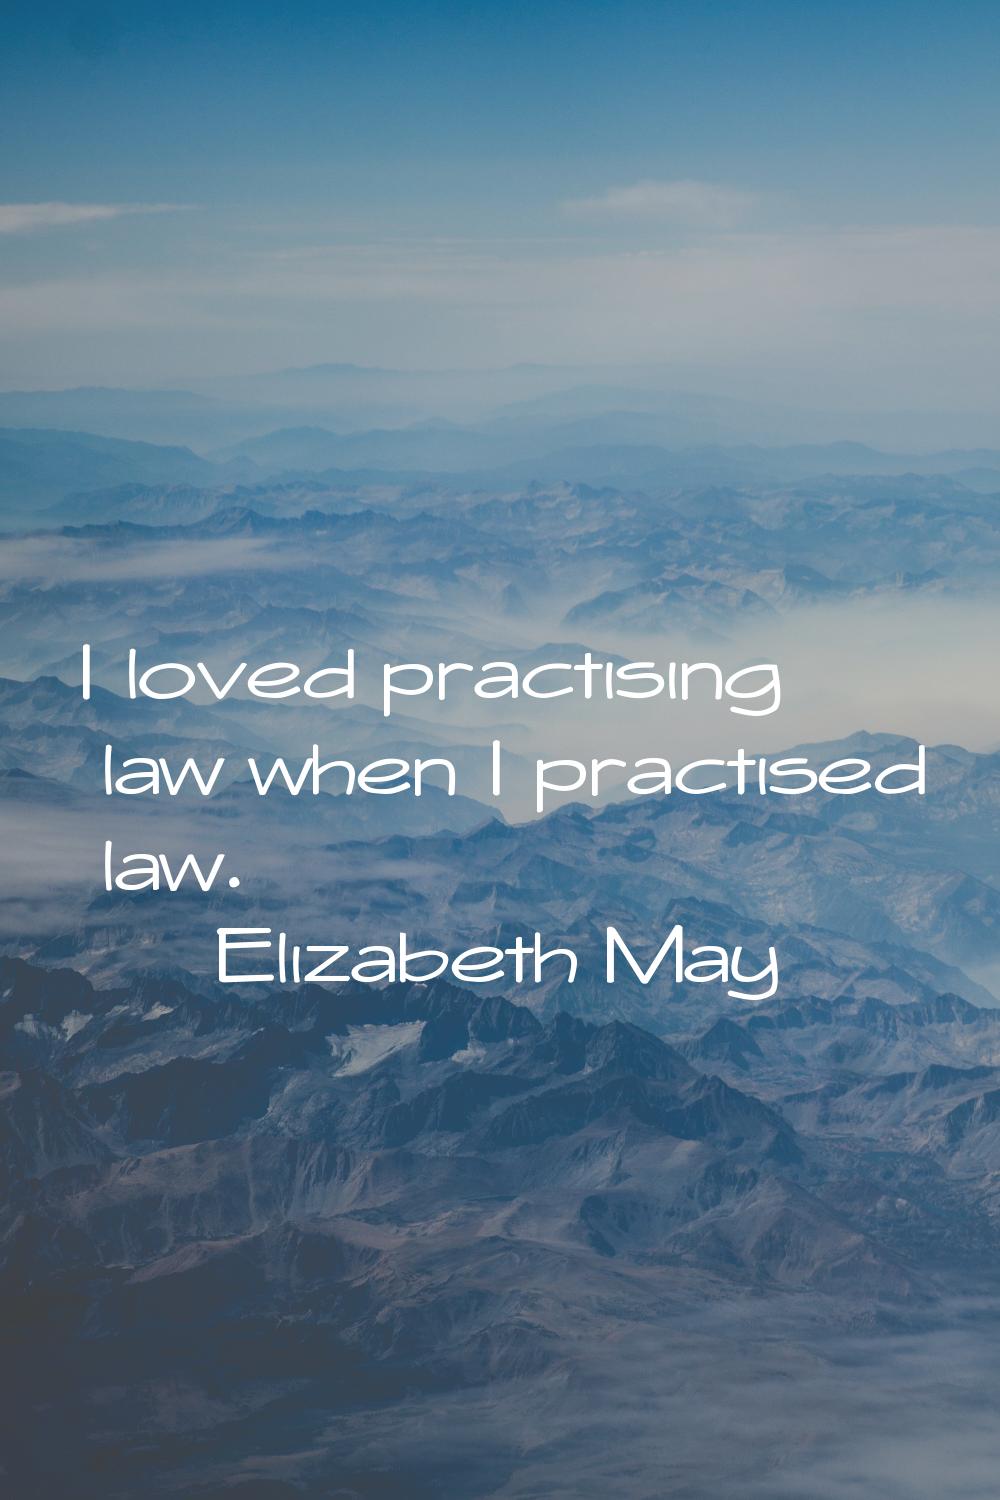 I loved practising law when I practised law.